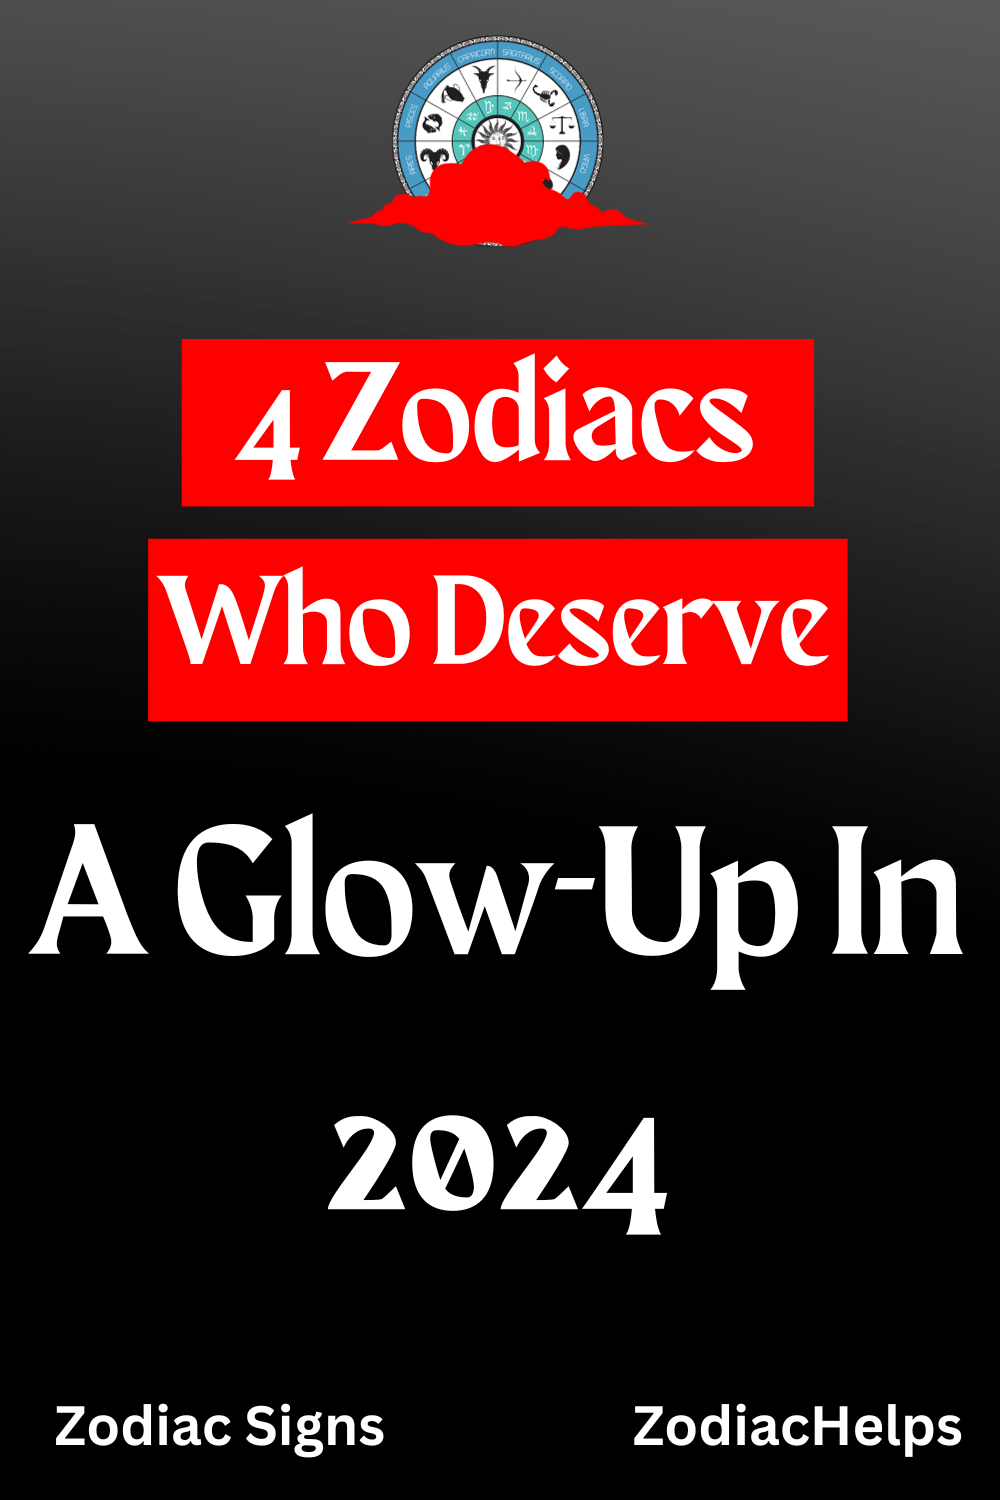 4 Zodiacs Who Deserve A Glow-Up In 2024